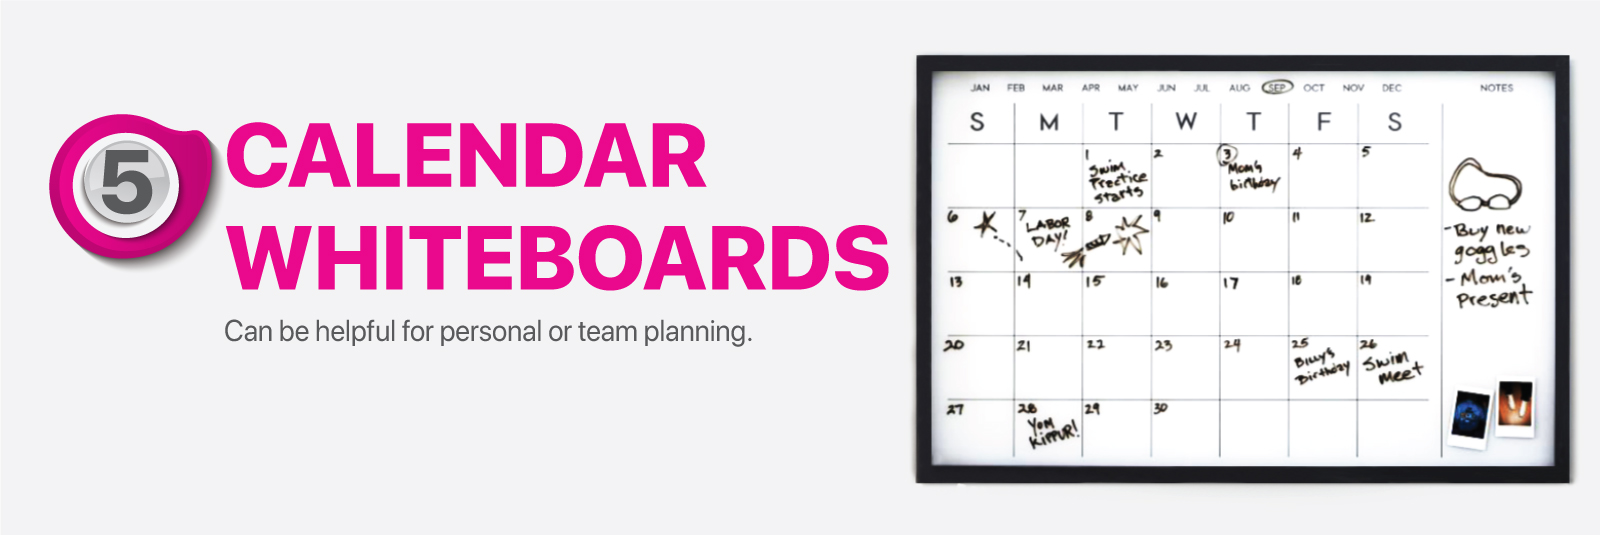 Calendar whiteboards can be helpful for personal or team planning.